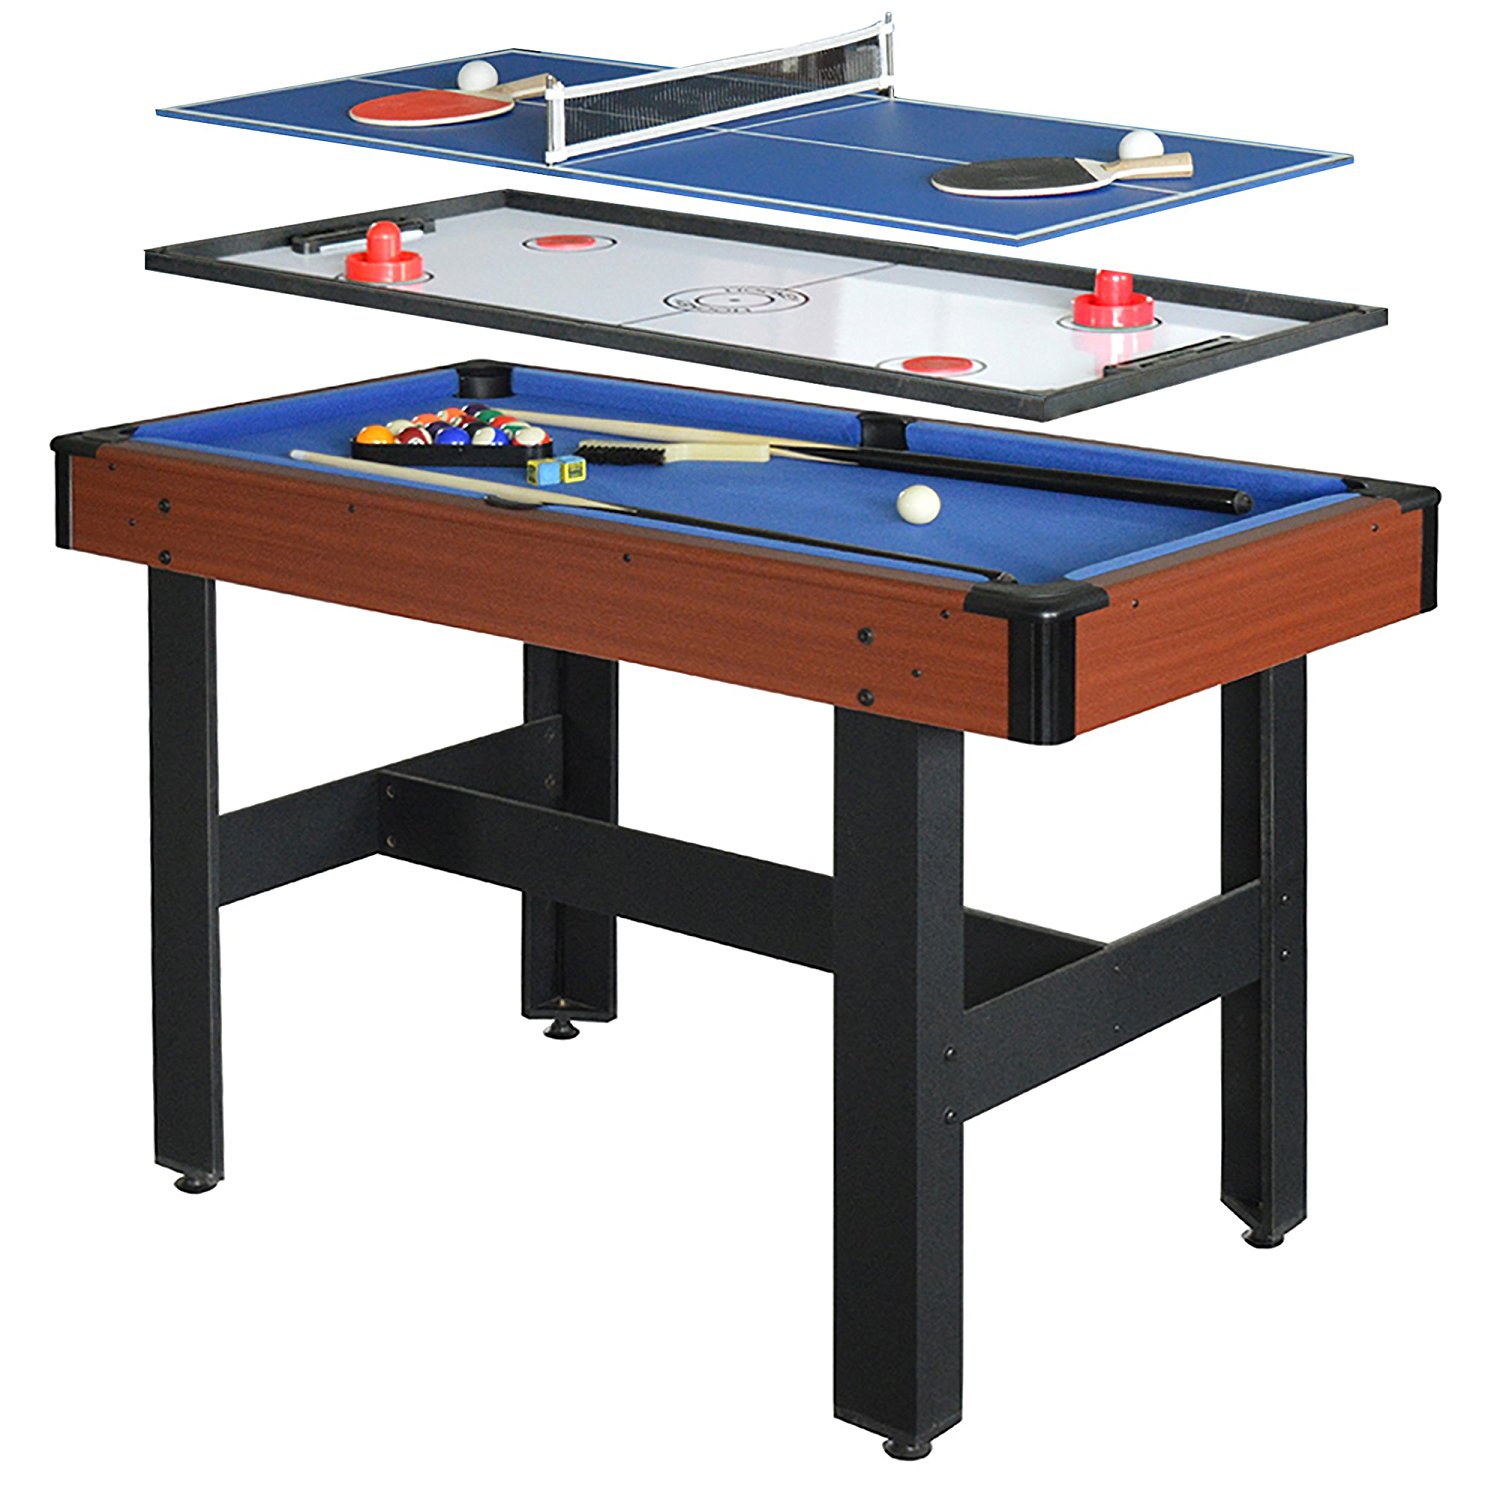 Hathaway Triad 48-Inch 3-in-1 Multi-game Table